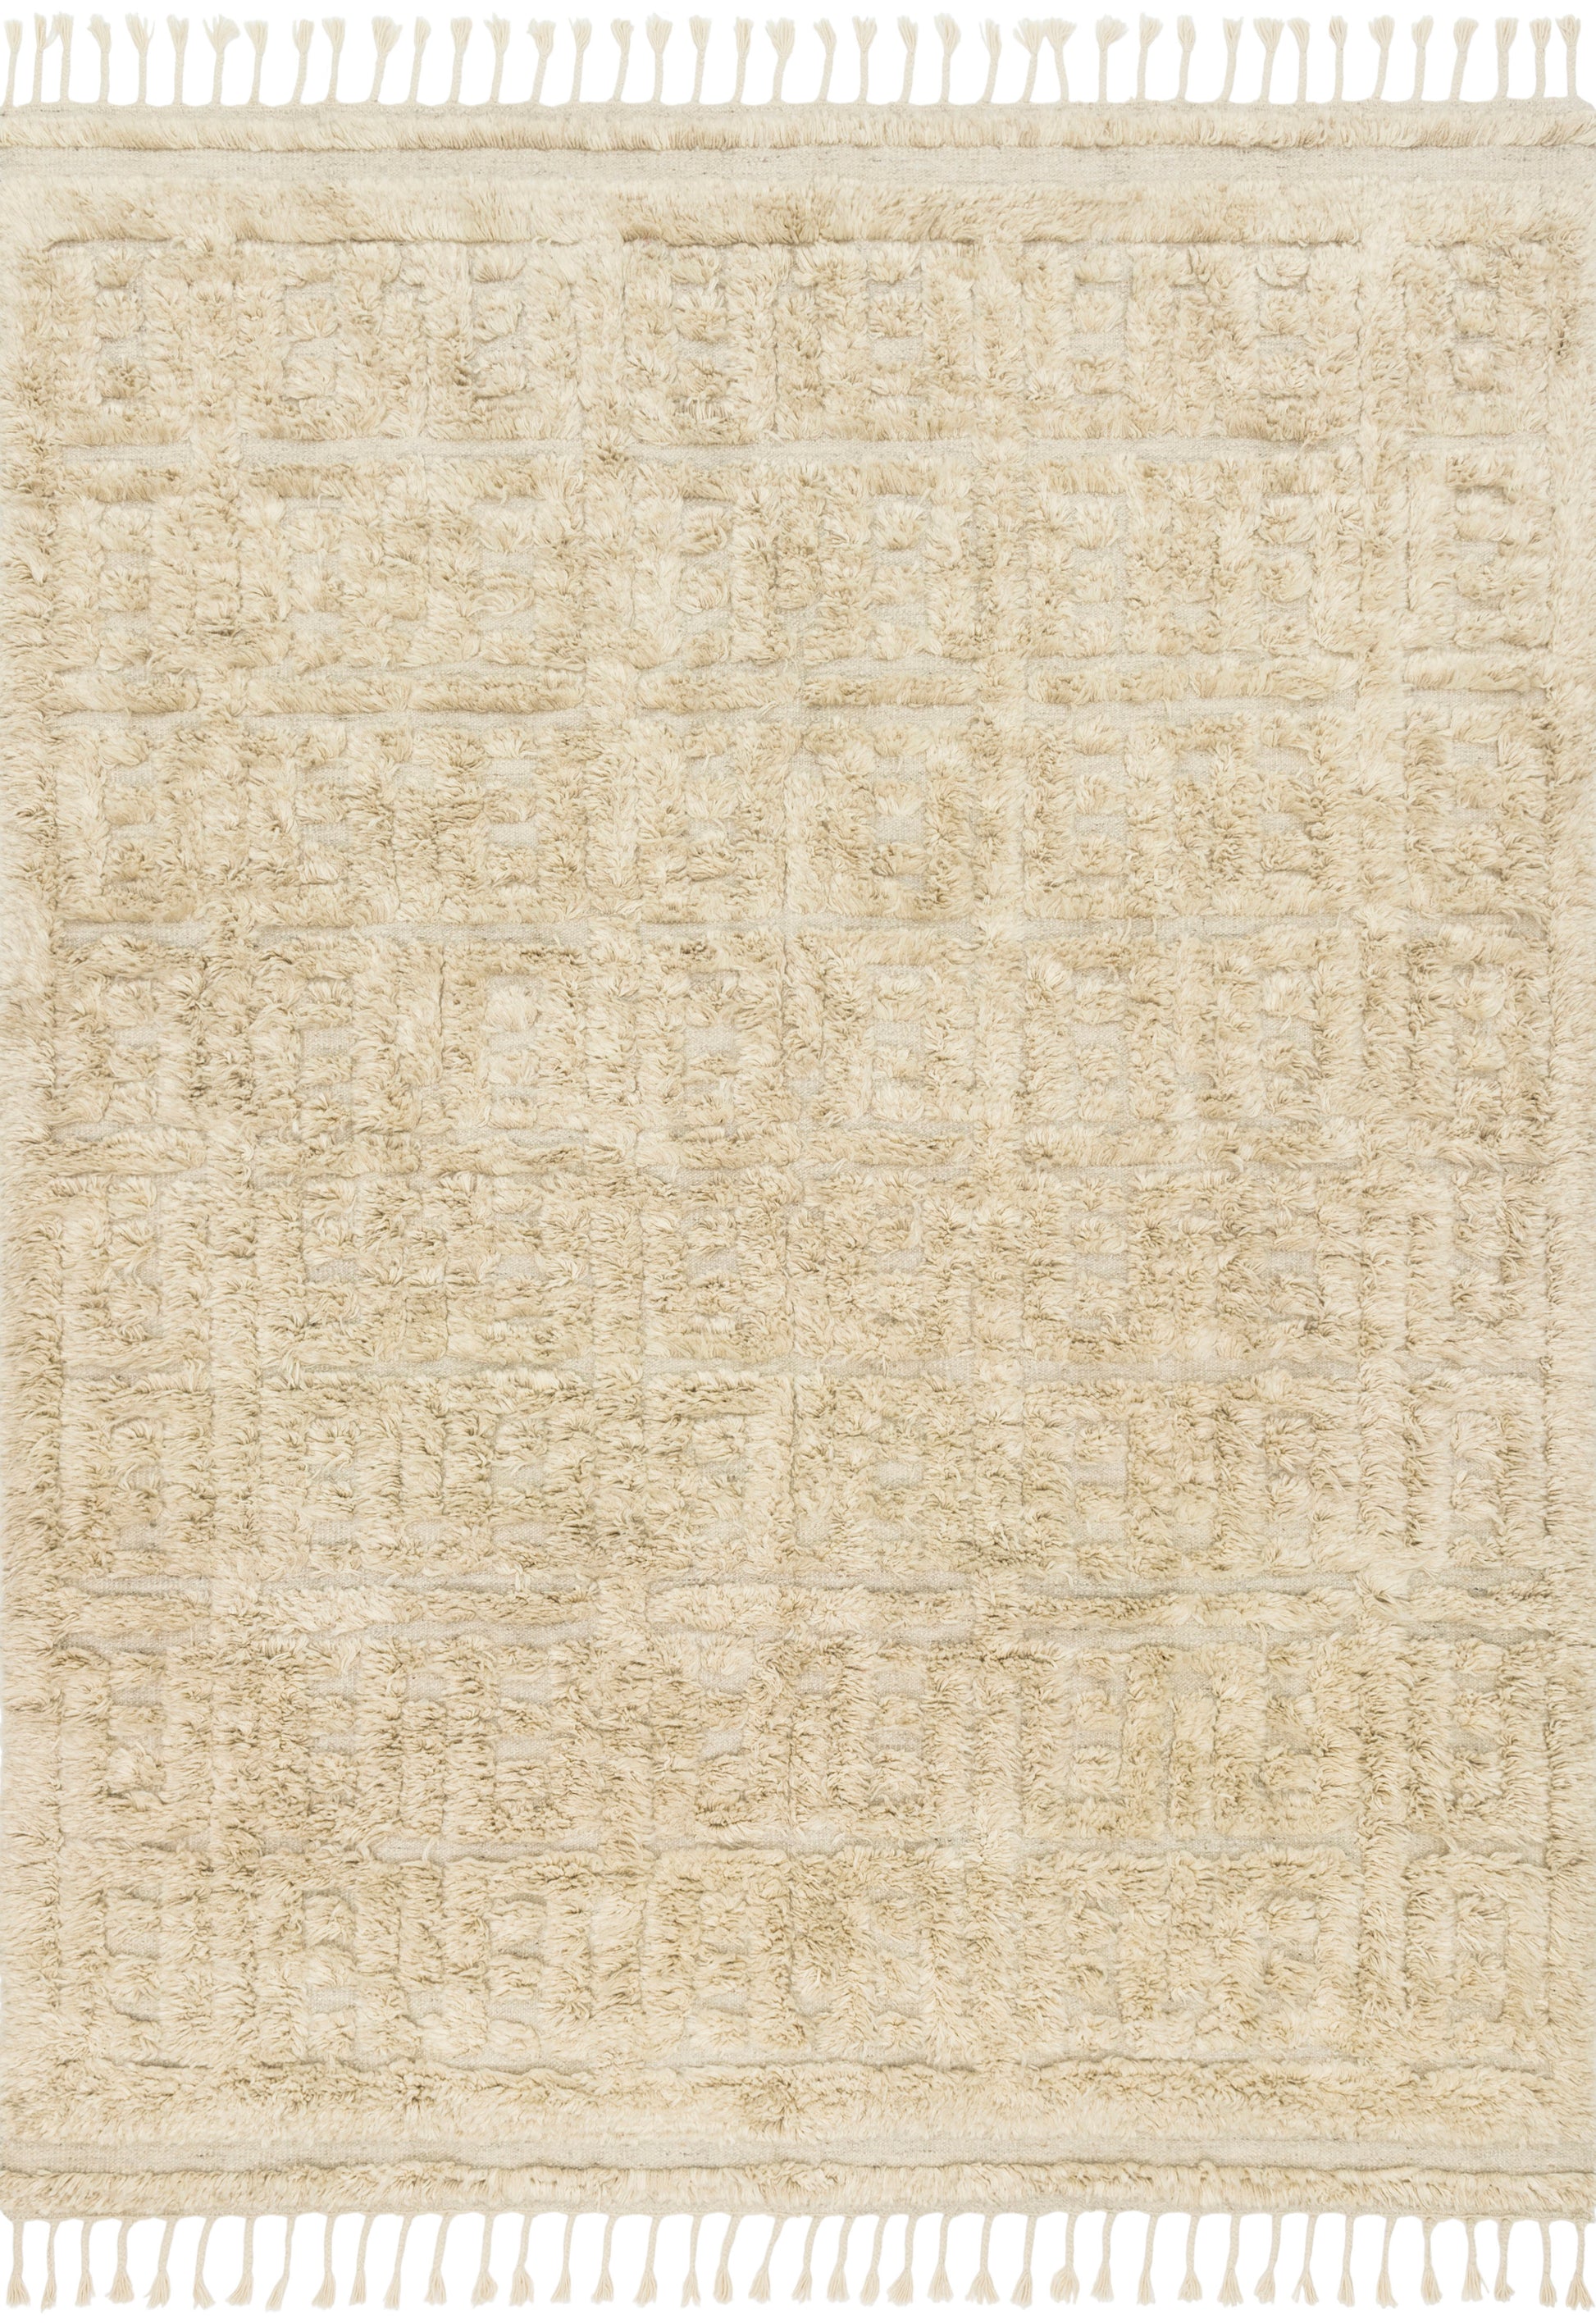 A picture of Loloi's Hygge rug, in style YG-04, color Oatmeal / Sand